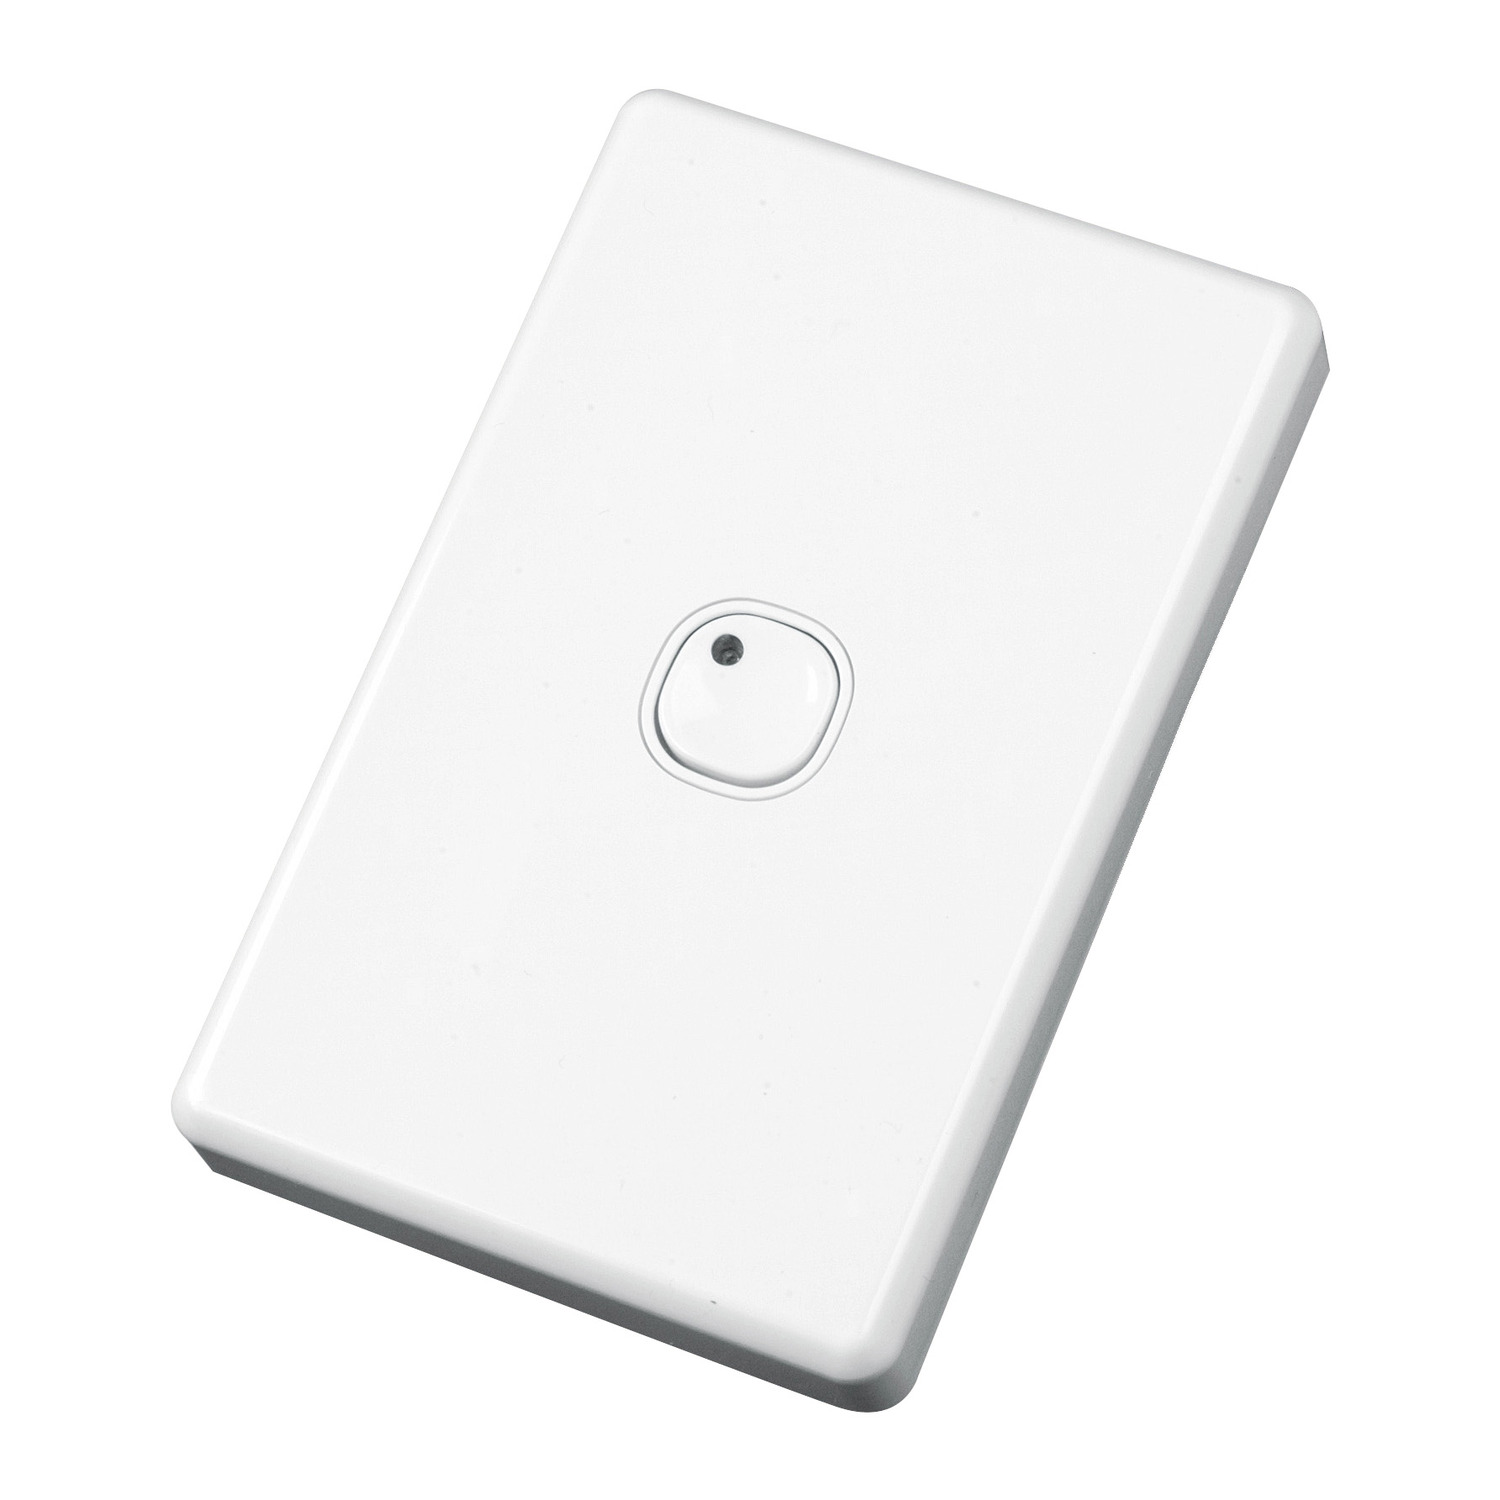 C-Bus Plastic Plate Wall Switches, 1 Button